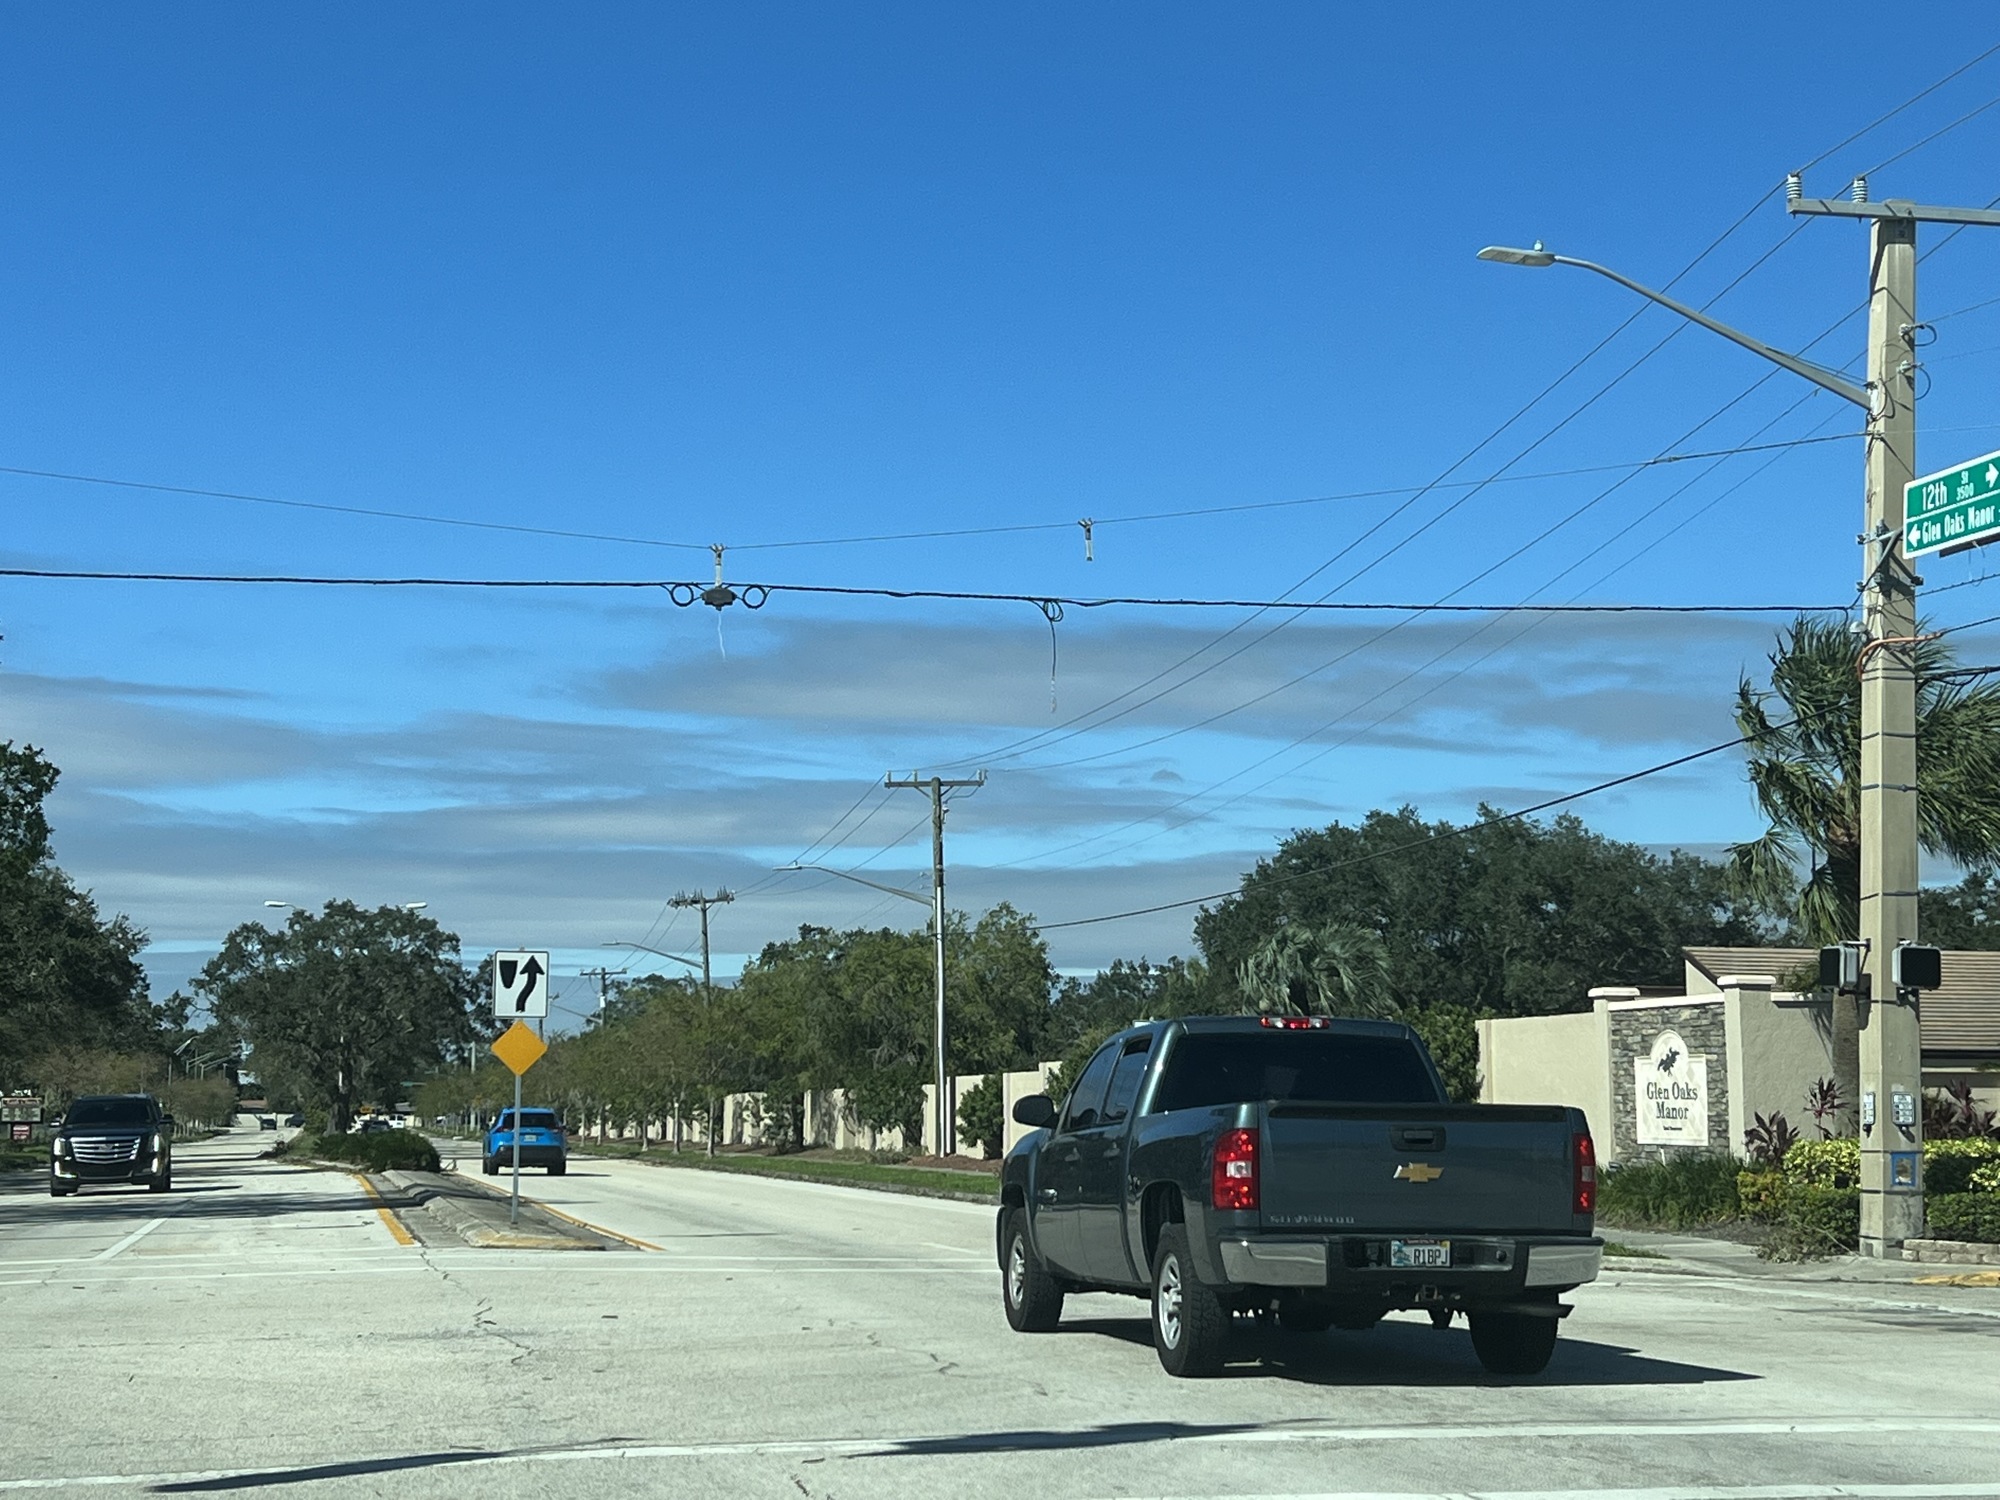 Traffic lights and street signs are gone at the intersection of 12th Street and Beneva Road in Sarasota at 4 p.m. Thursday. (Photo by Kaelyn Adix)